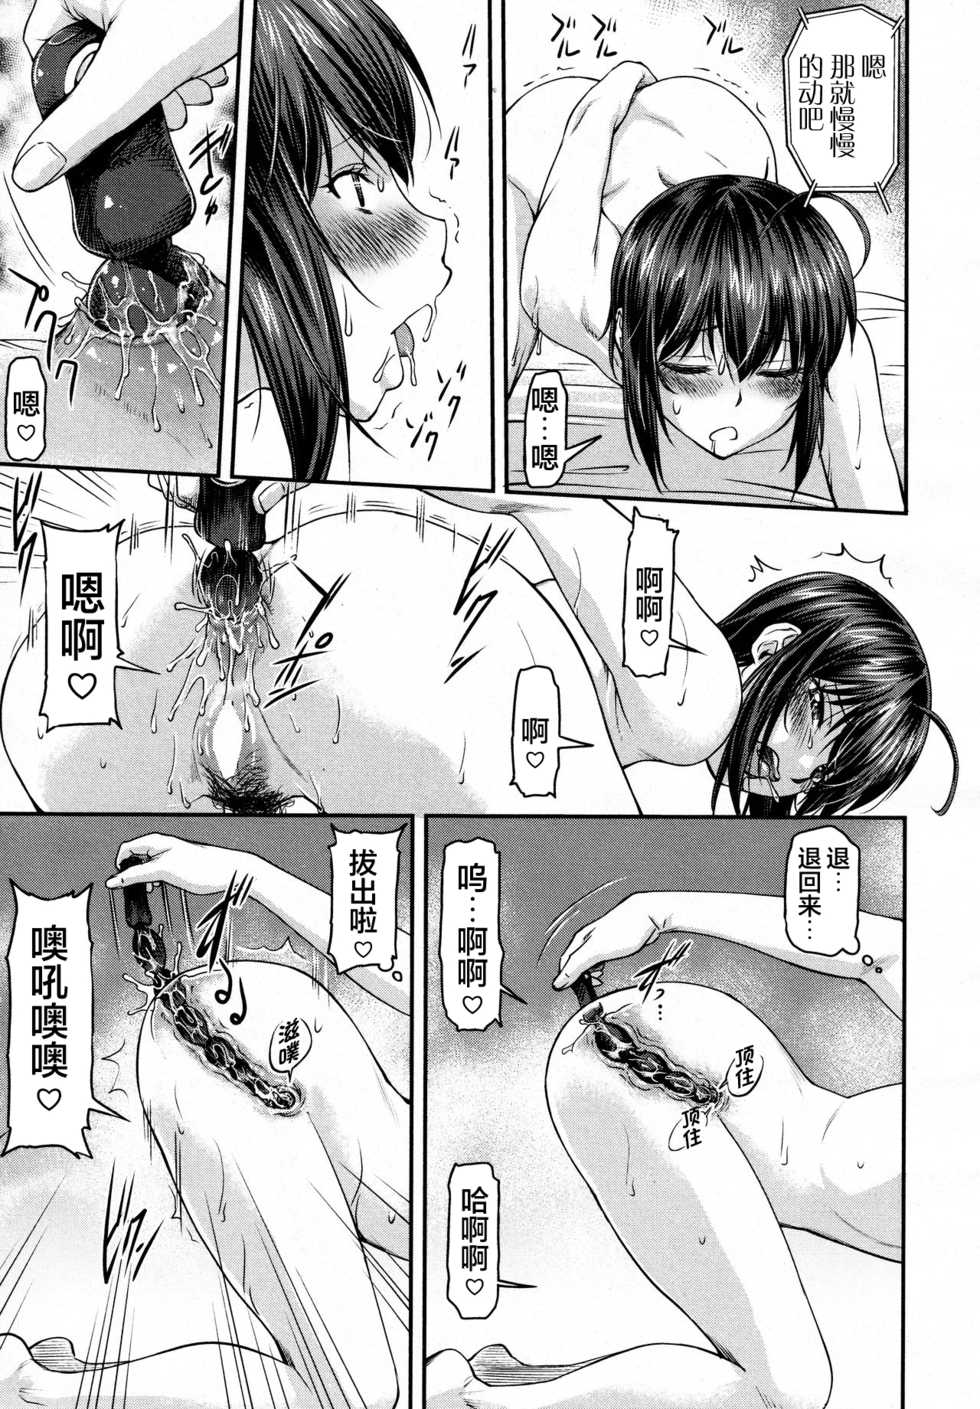 [Nagare Ippon] Kaname Date #11 (COMIC AUN 2020-12) [Chinese] [不可视汉化] [Digital] - Page 22